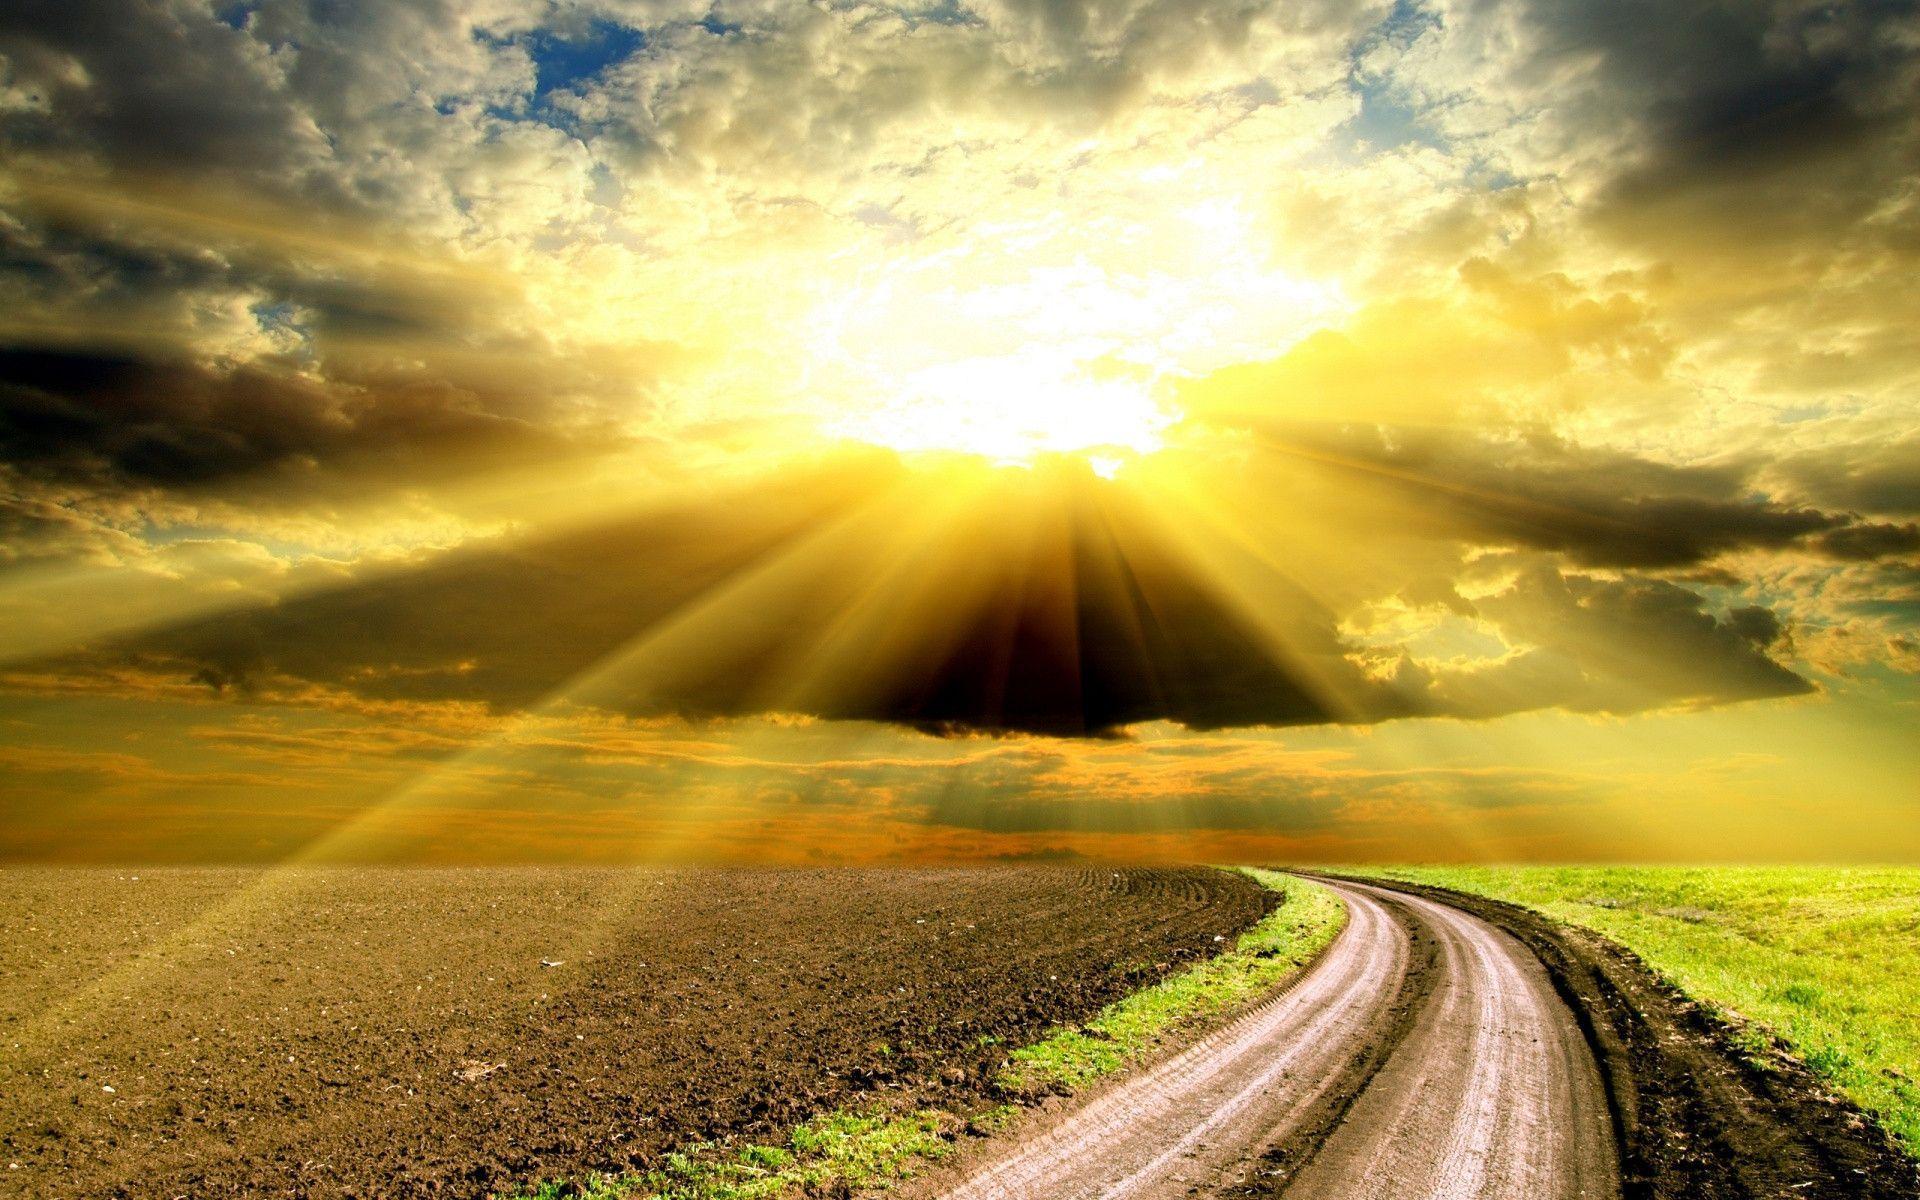 Download HD Gorgeous Sunlight Facebook Timeline Cover Photo